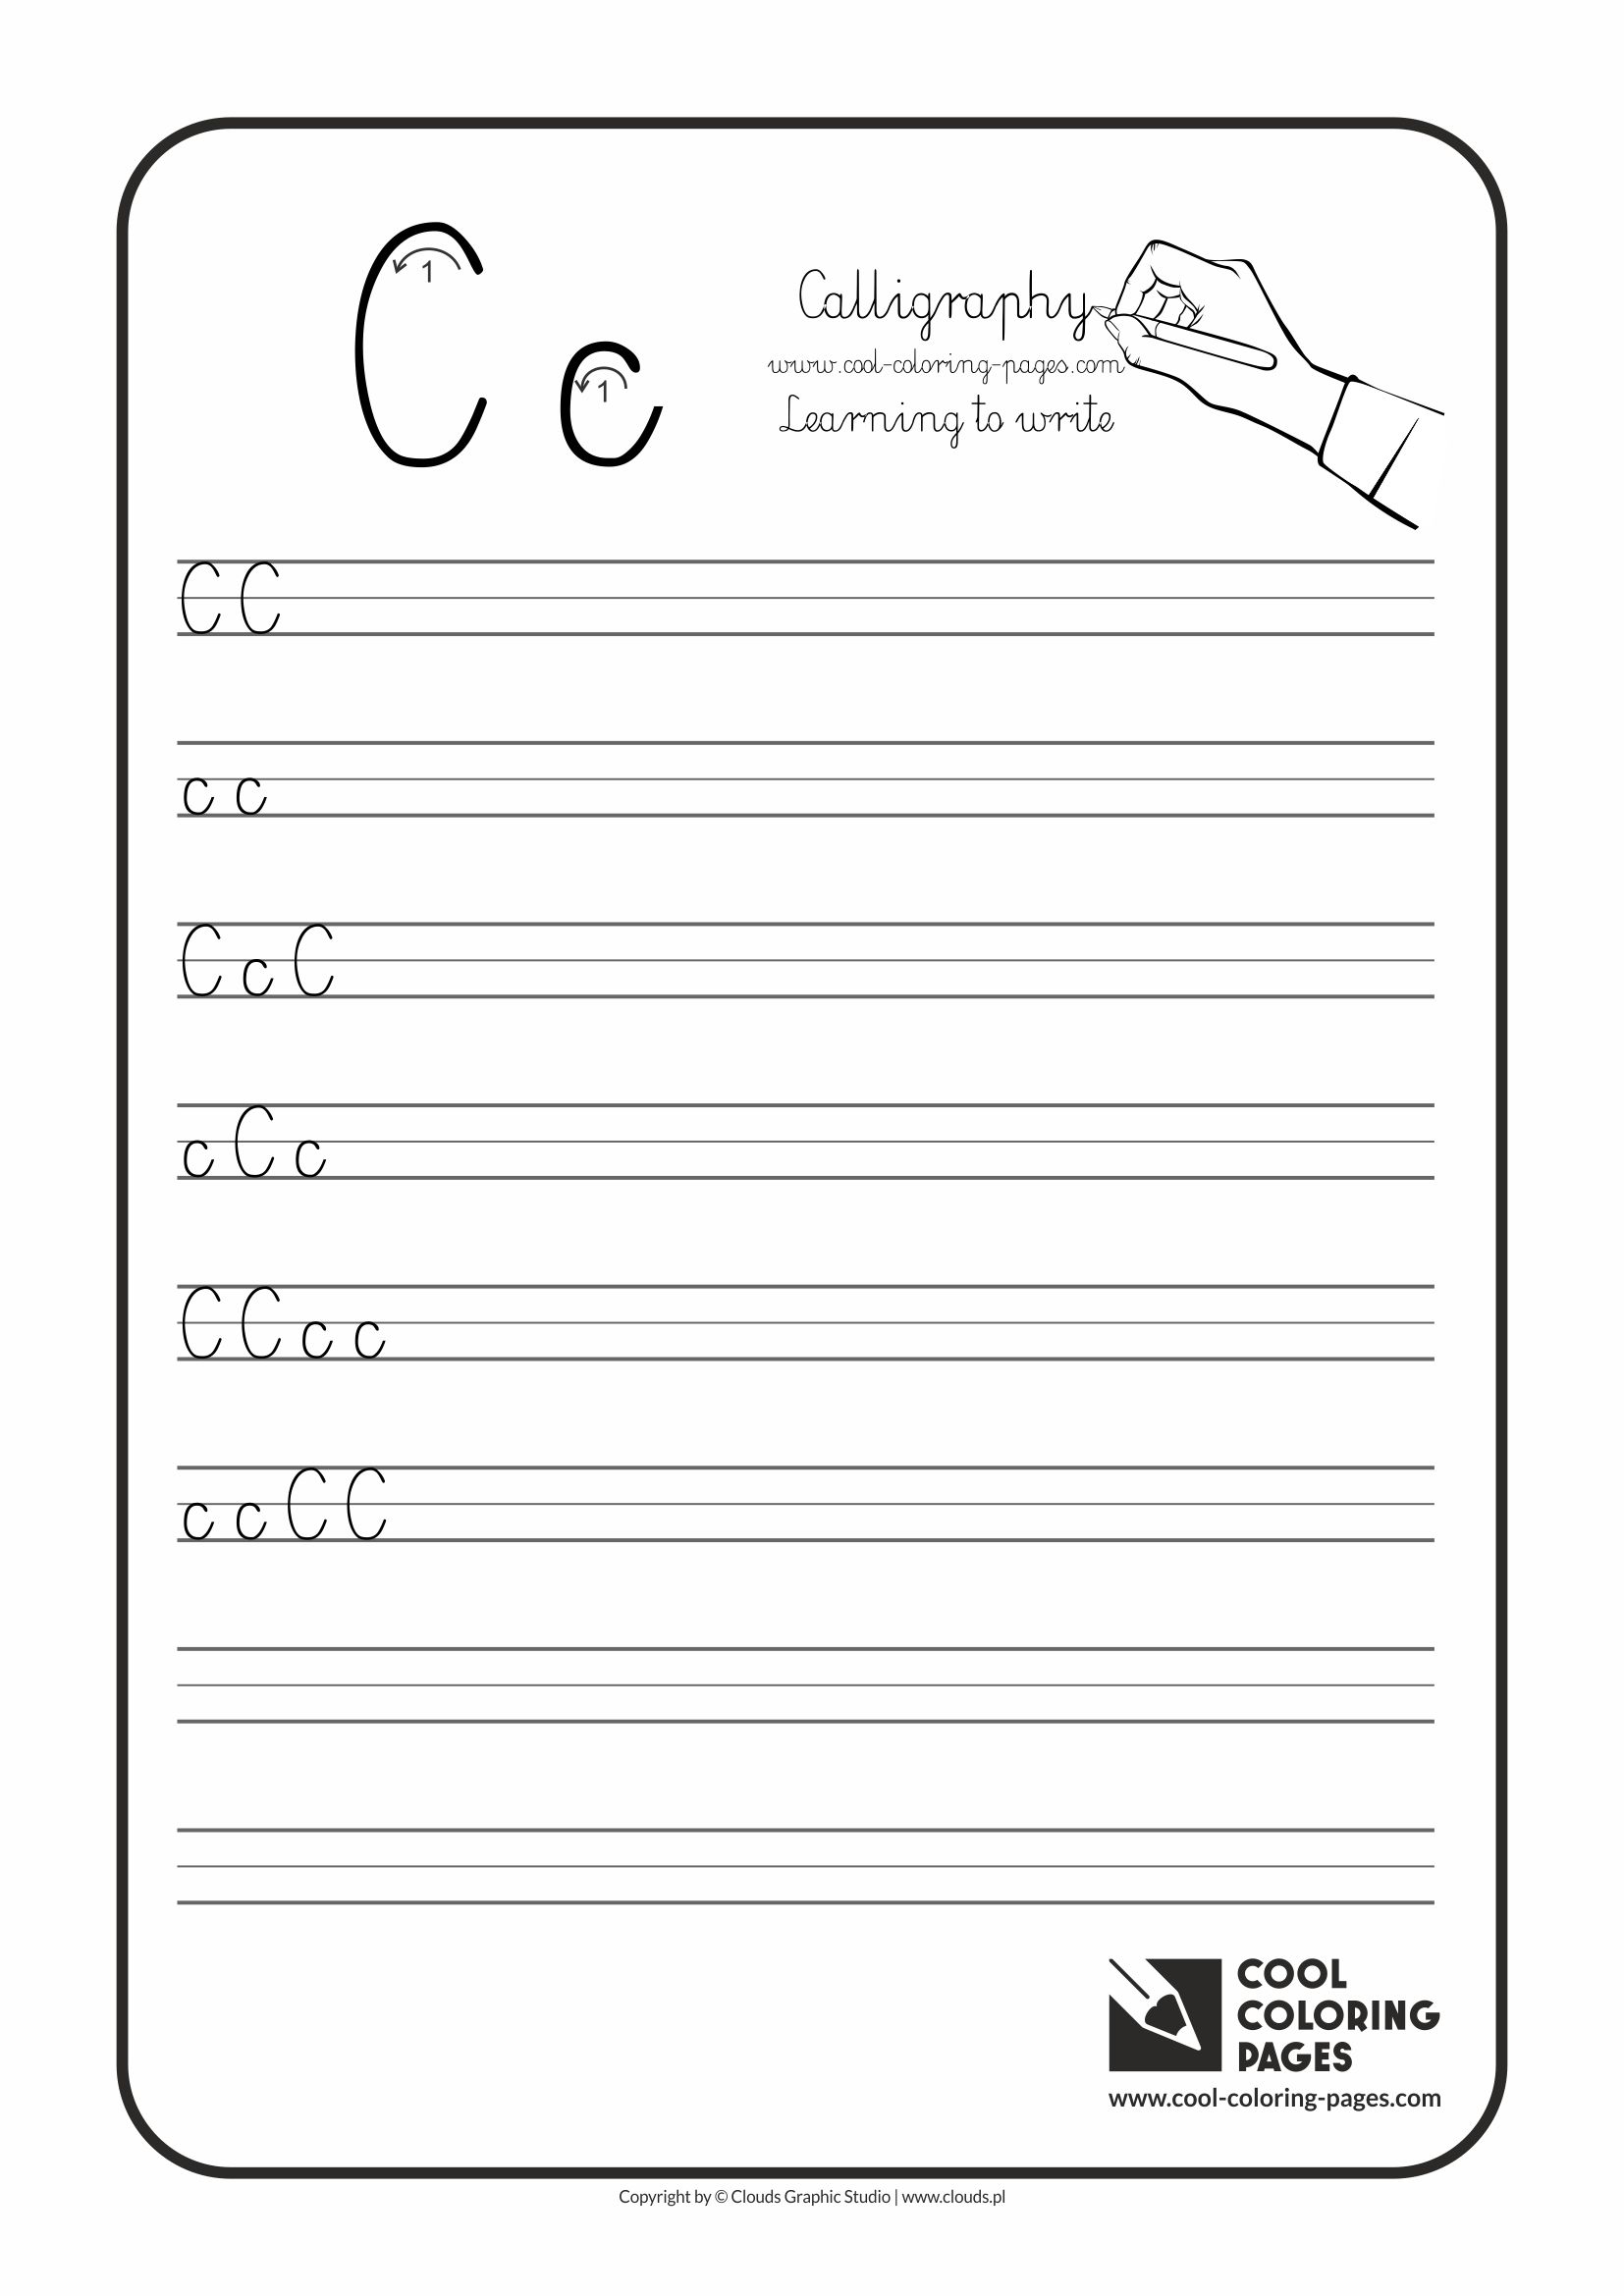 Cool coloring pages letter c